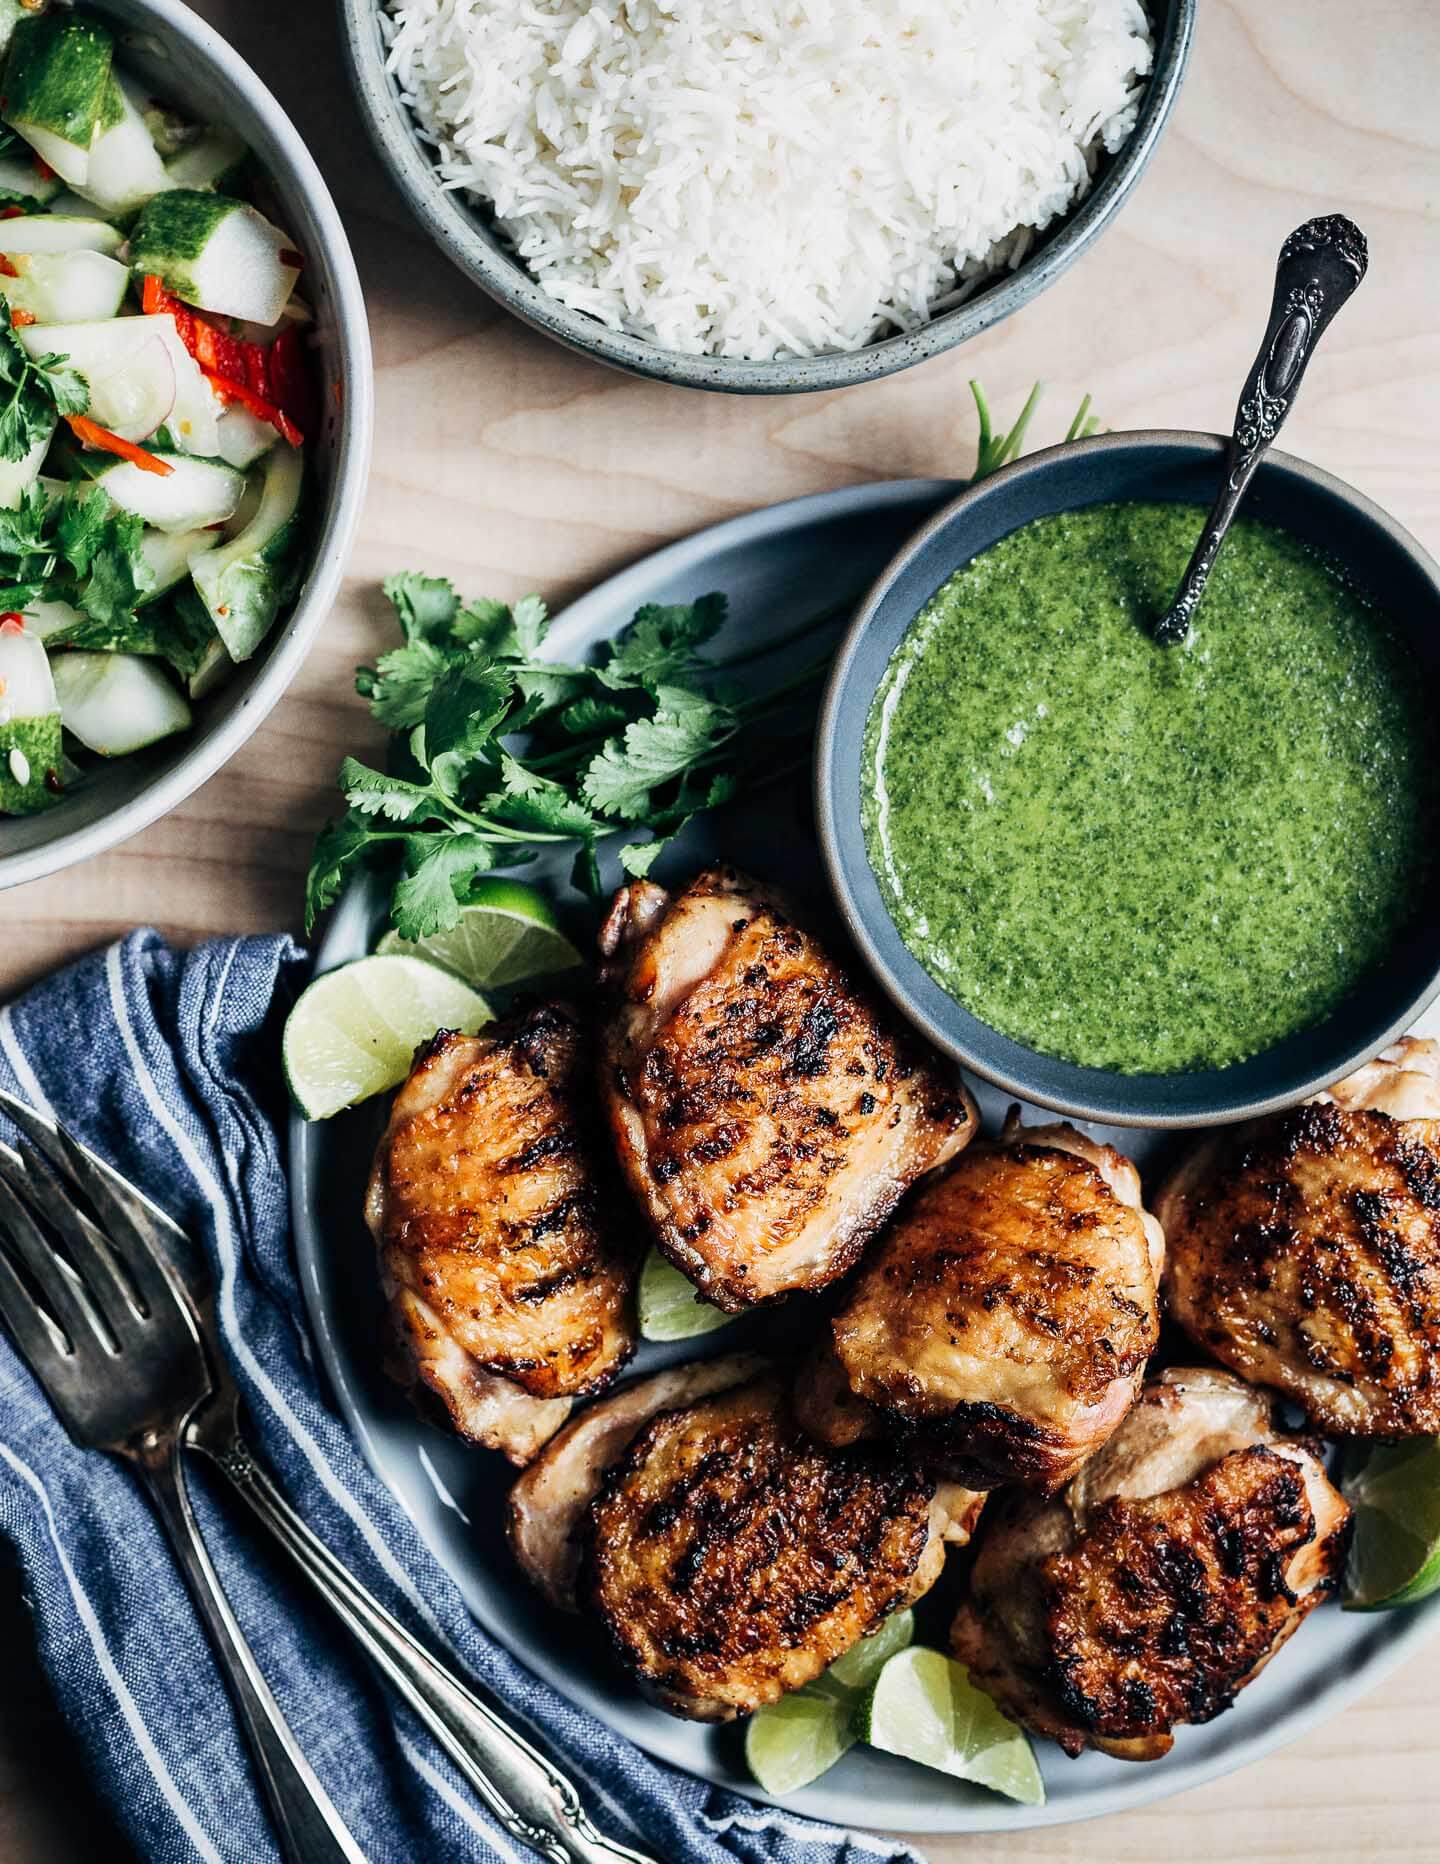 Grilled coconut lime chicken thighs come off the grill with crispy, caramelized skin and just the right amount of tang, sweetness, and spicy heat. Whether you're hosting a Labor Day cookout for neighbors or just your family, you can prep these chicken thighs ahead so all you need to do in the moment is fire up the grill!